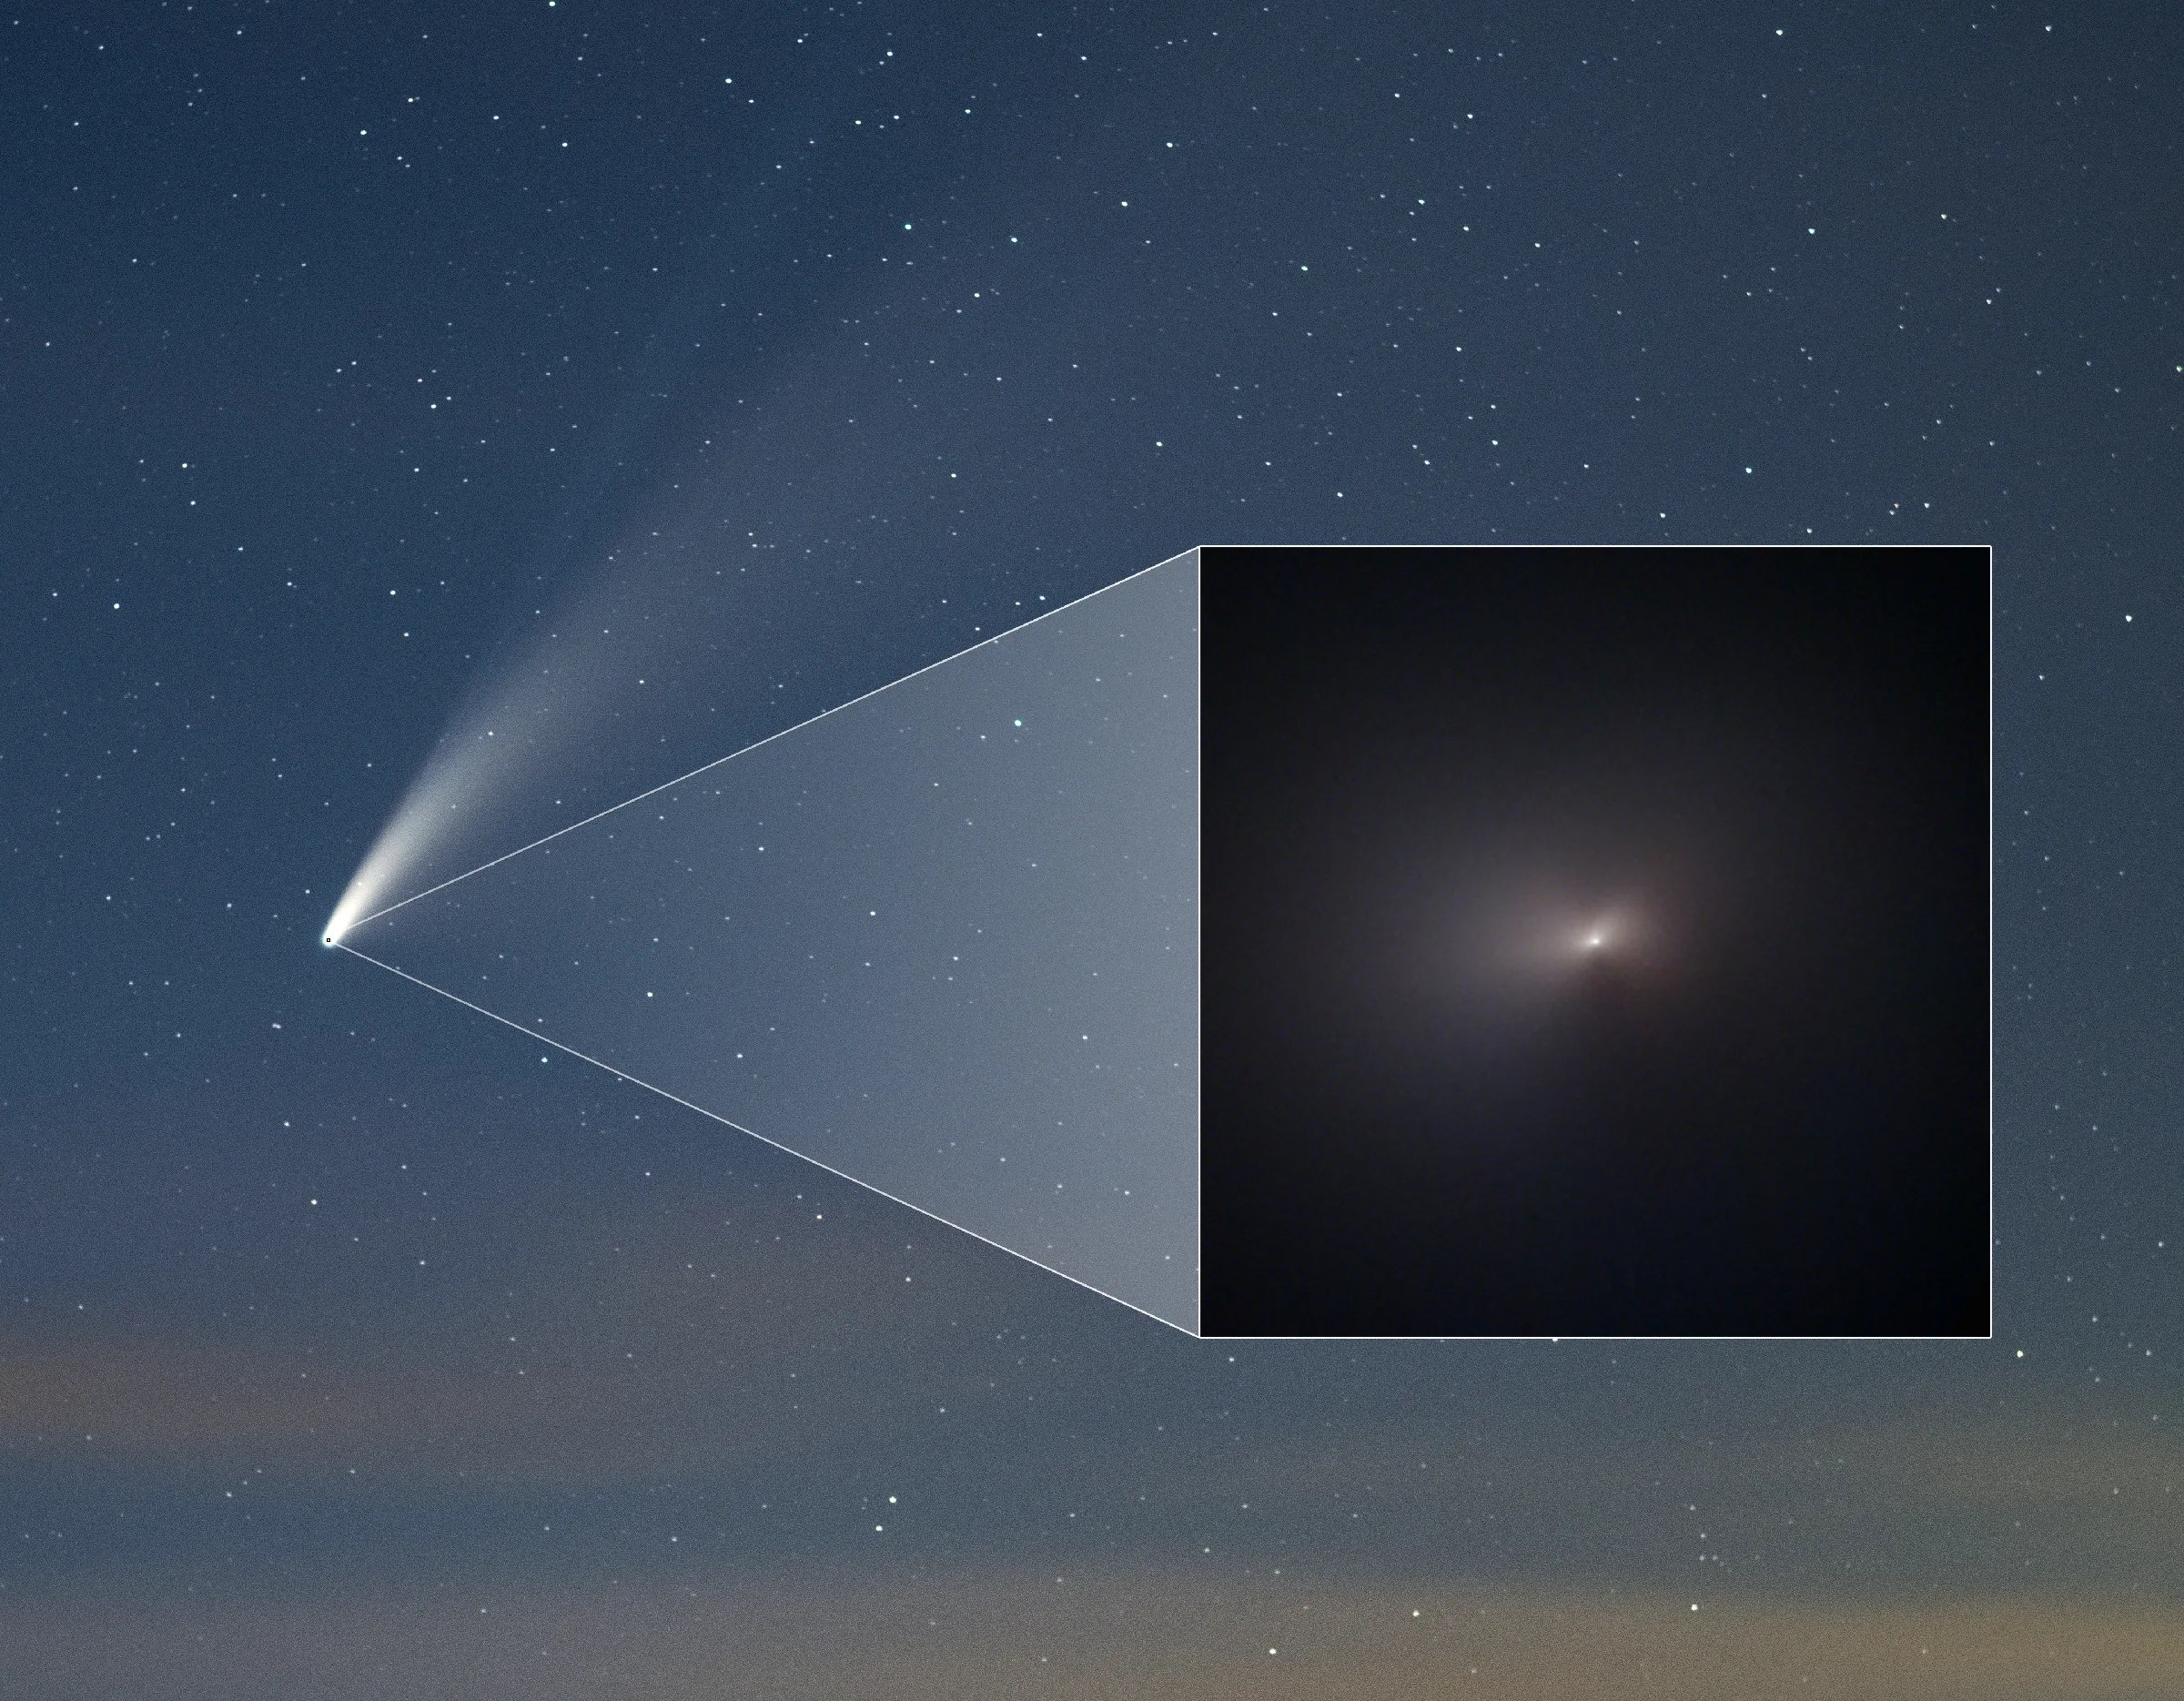 bright white streak of comet NEOWISE against a dark blue sky, with an almost-grayscale view of the comet from Hubble inset